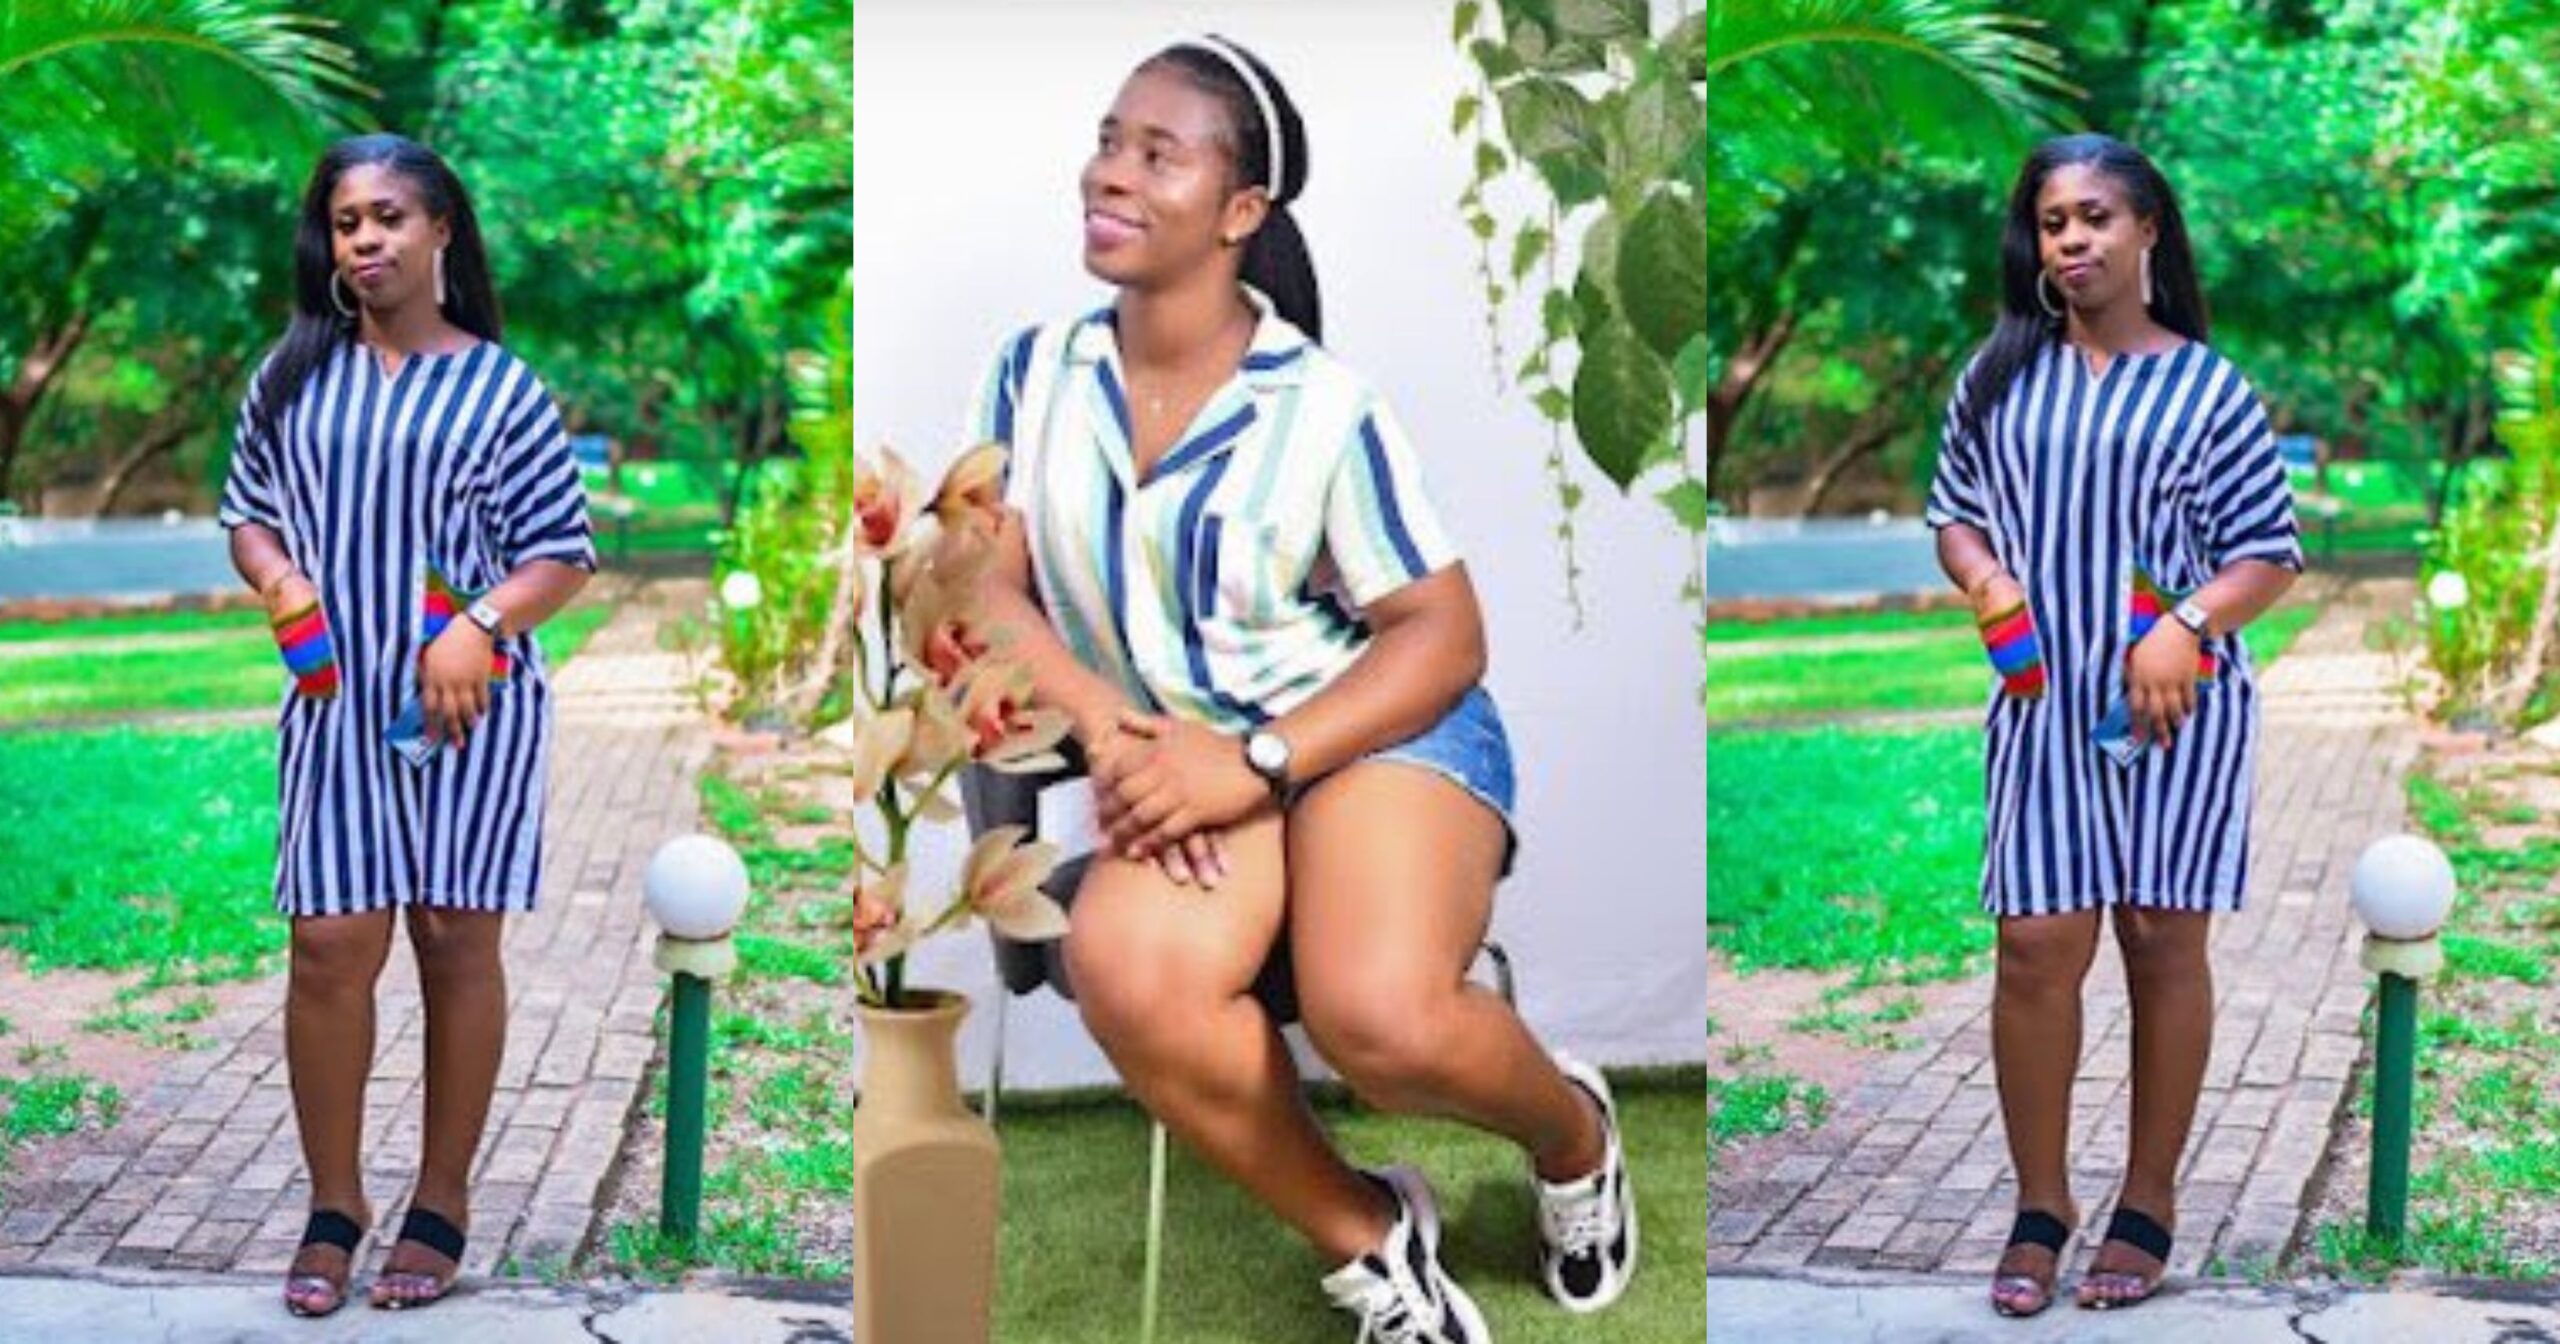 Beautiful Photos Of Rita A Level 300 Student Of University Education Winneba Surfaces Online After She Commits Suicide.